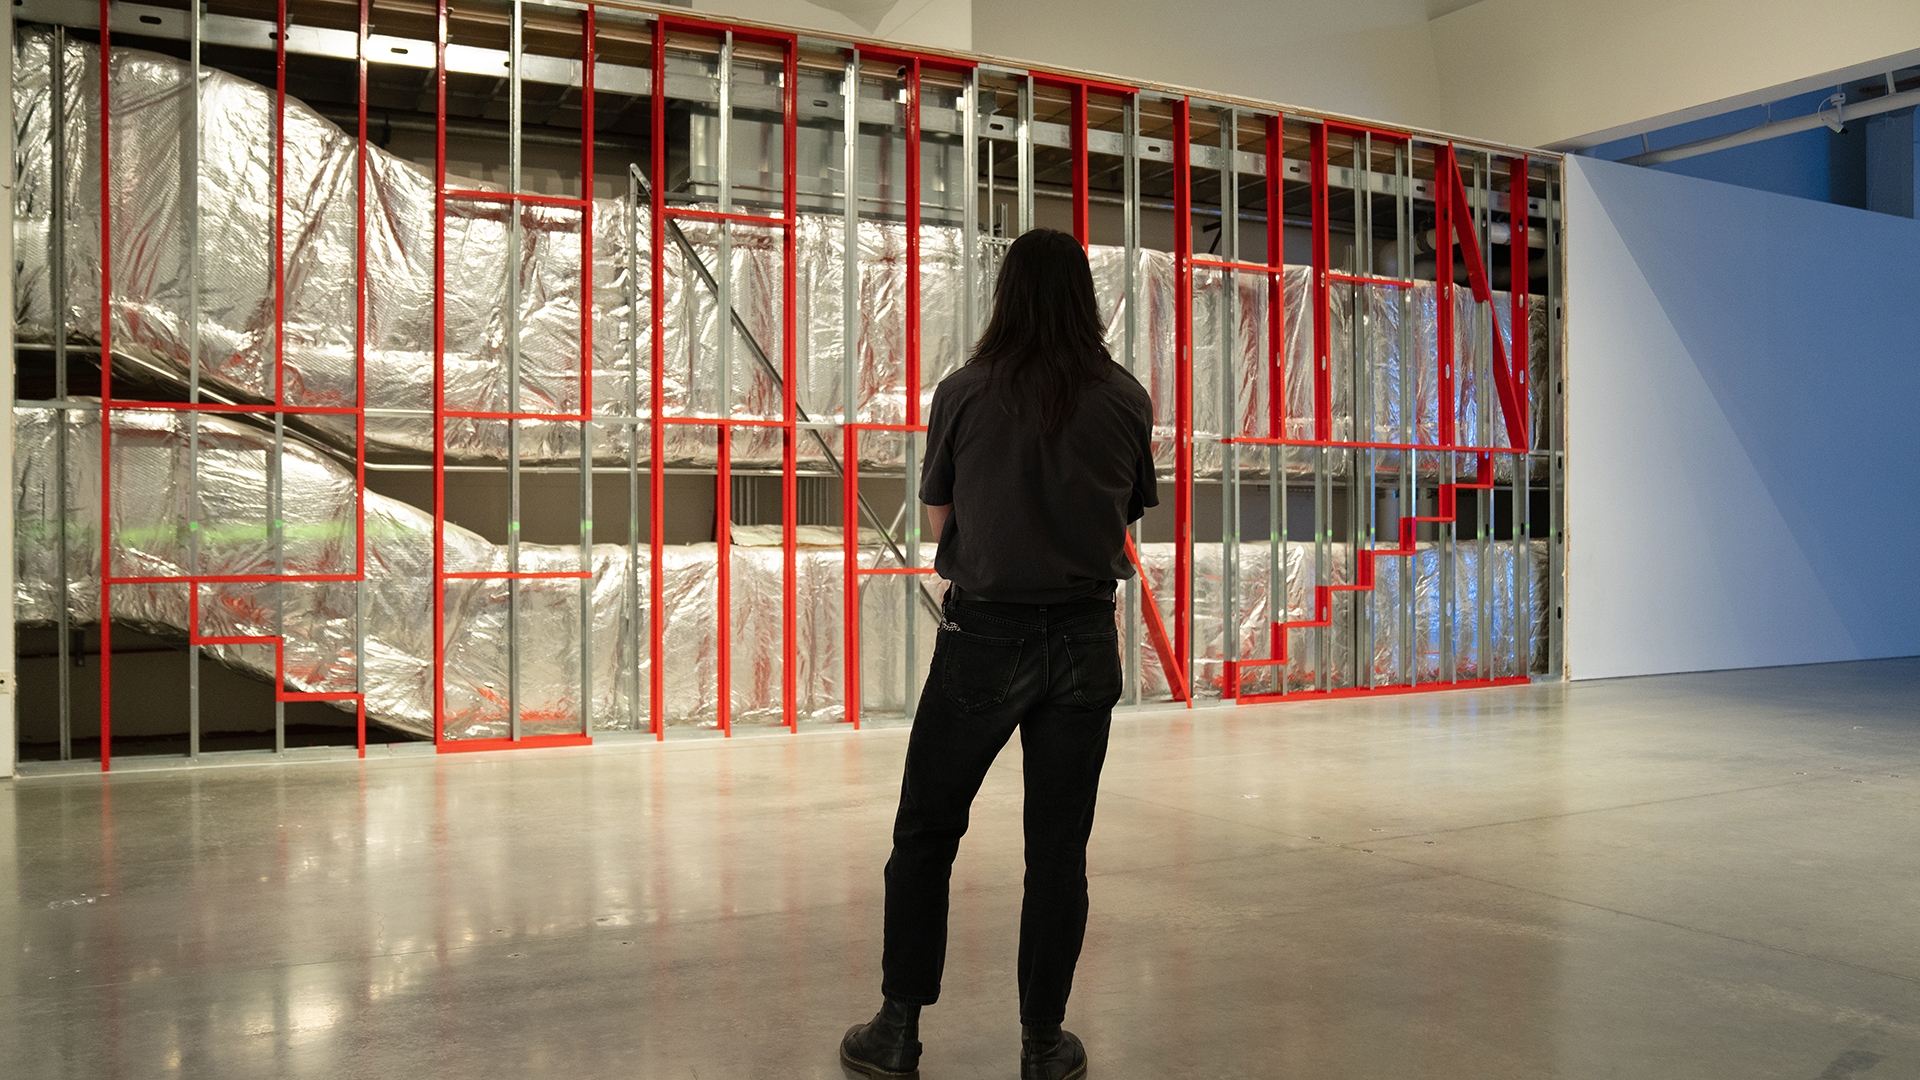 a person dressed in all black looks at a large artwork made of metal piping with designs painted on it in red